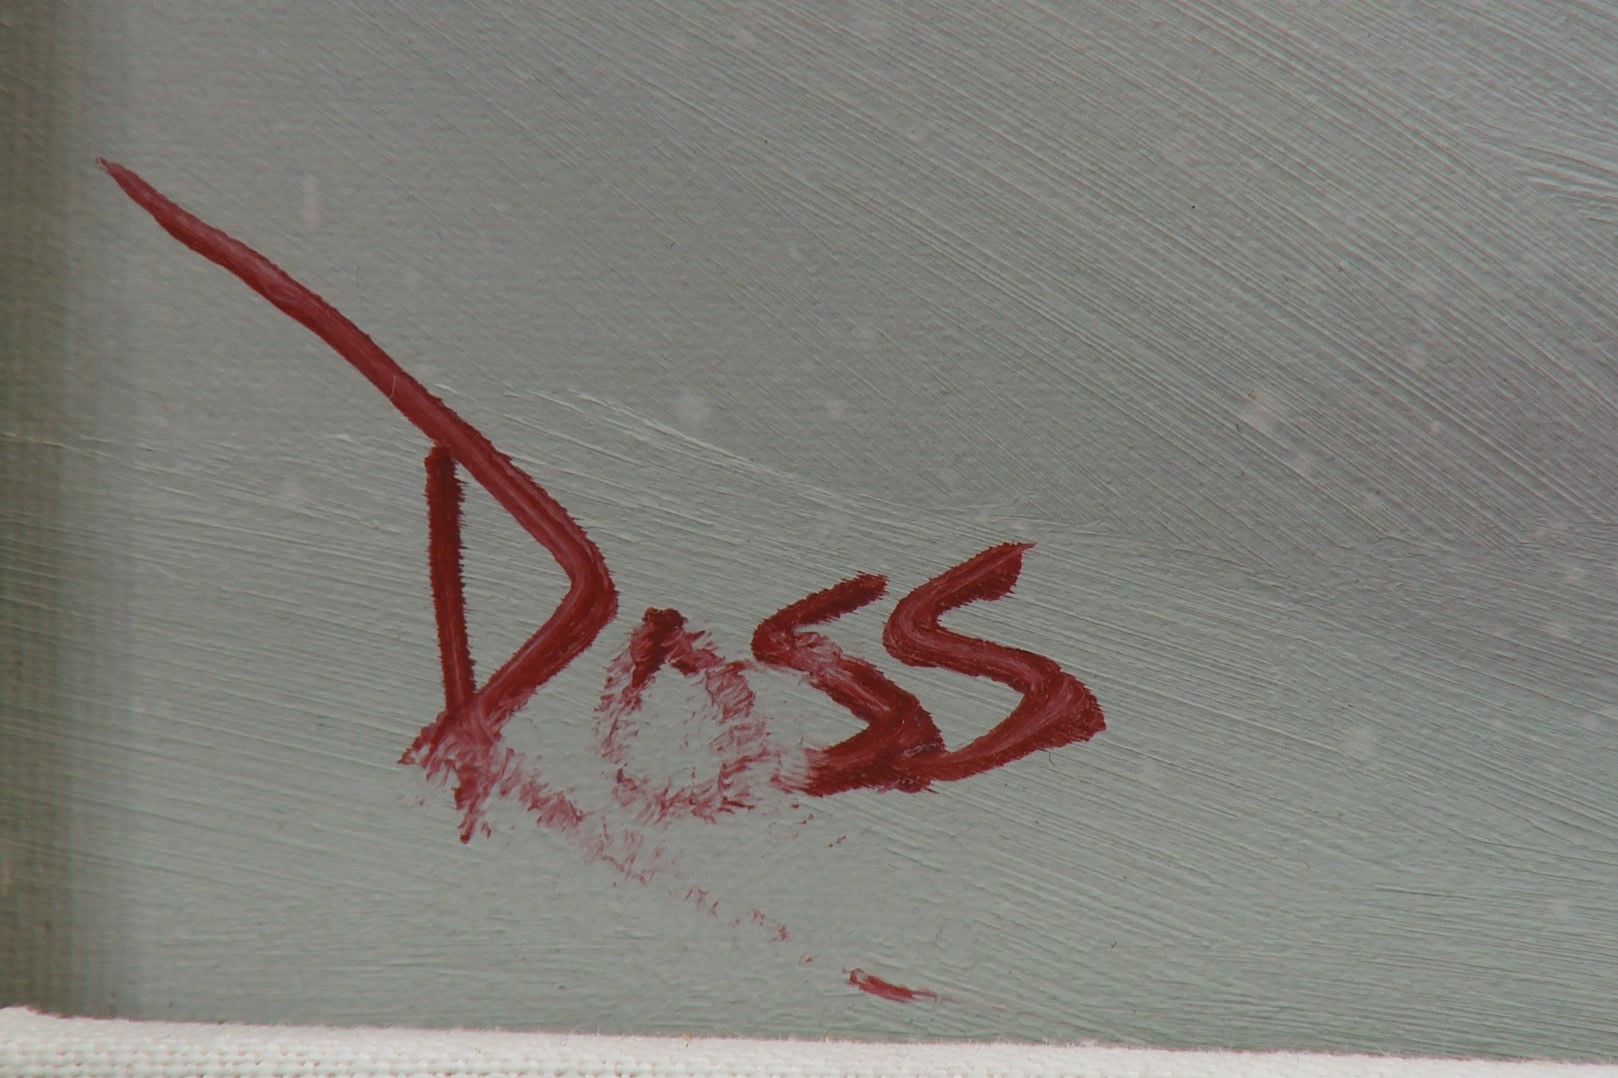 Bob Ross' signature on a painting.